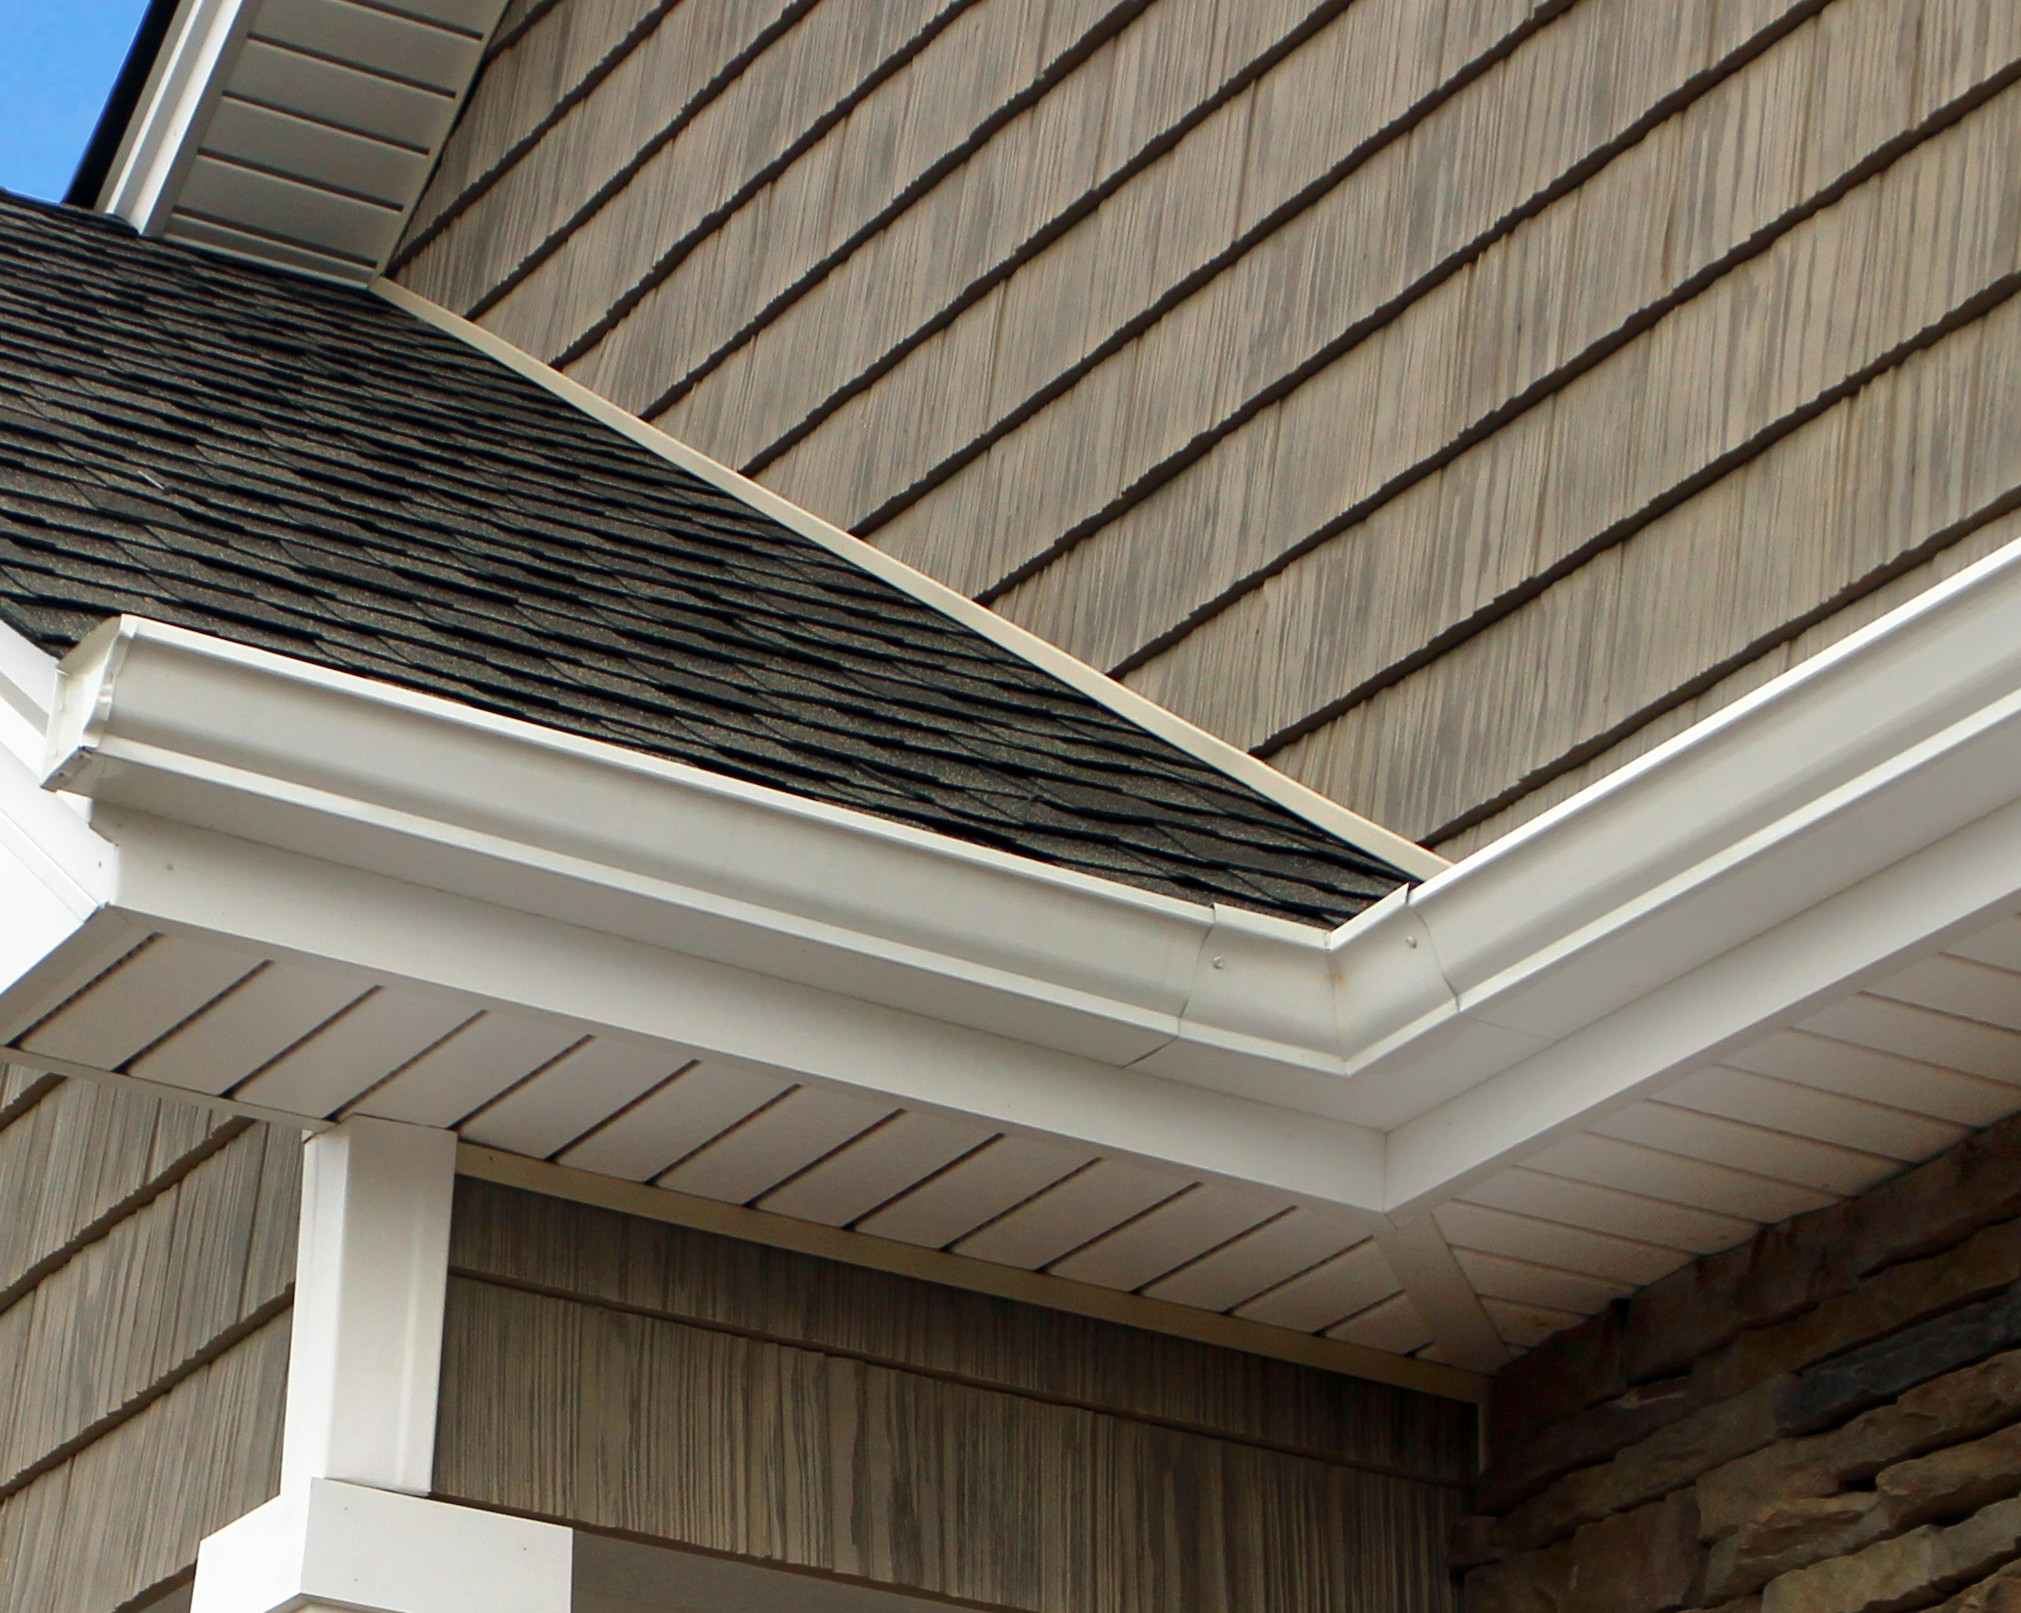 10 Quick Tips About Your Gutters